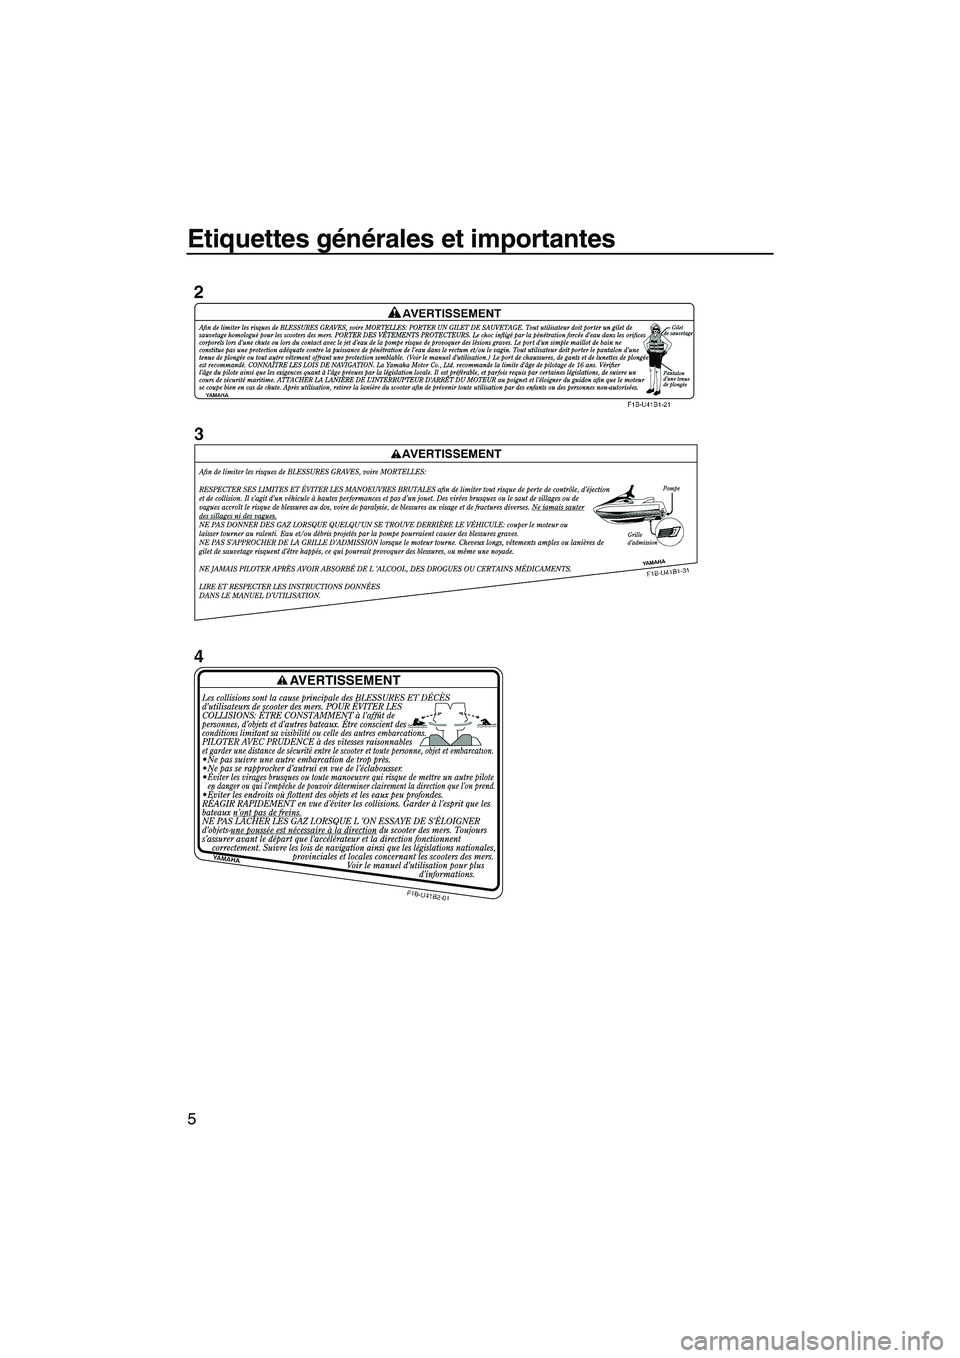 YAMAHA SVHO 2009  Notices Demploi (in French) Etiquettes générales et importantes
5
UF1W71F0.book  Page 5  Tuesday, July 1, 2008  9:44 AM 